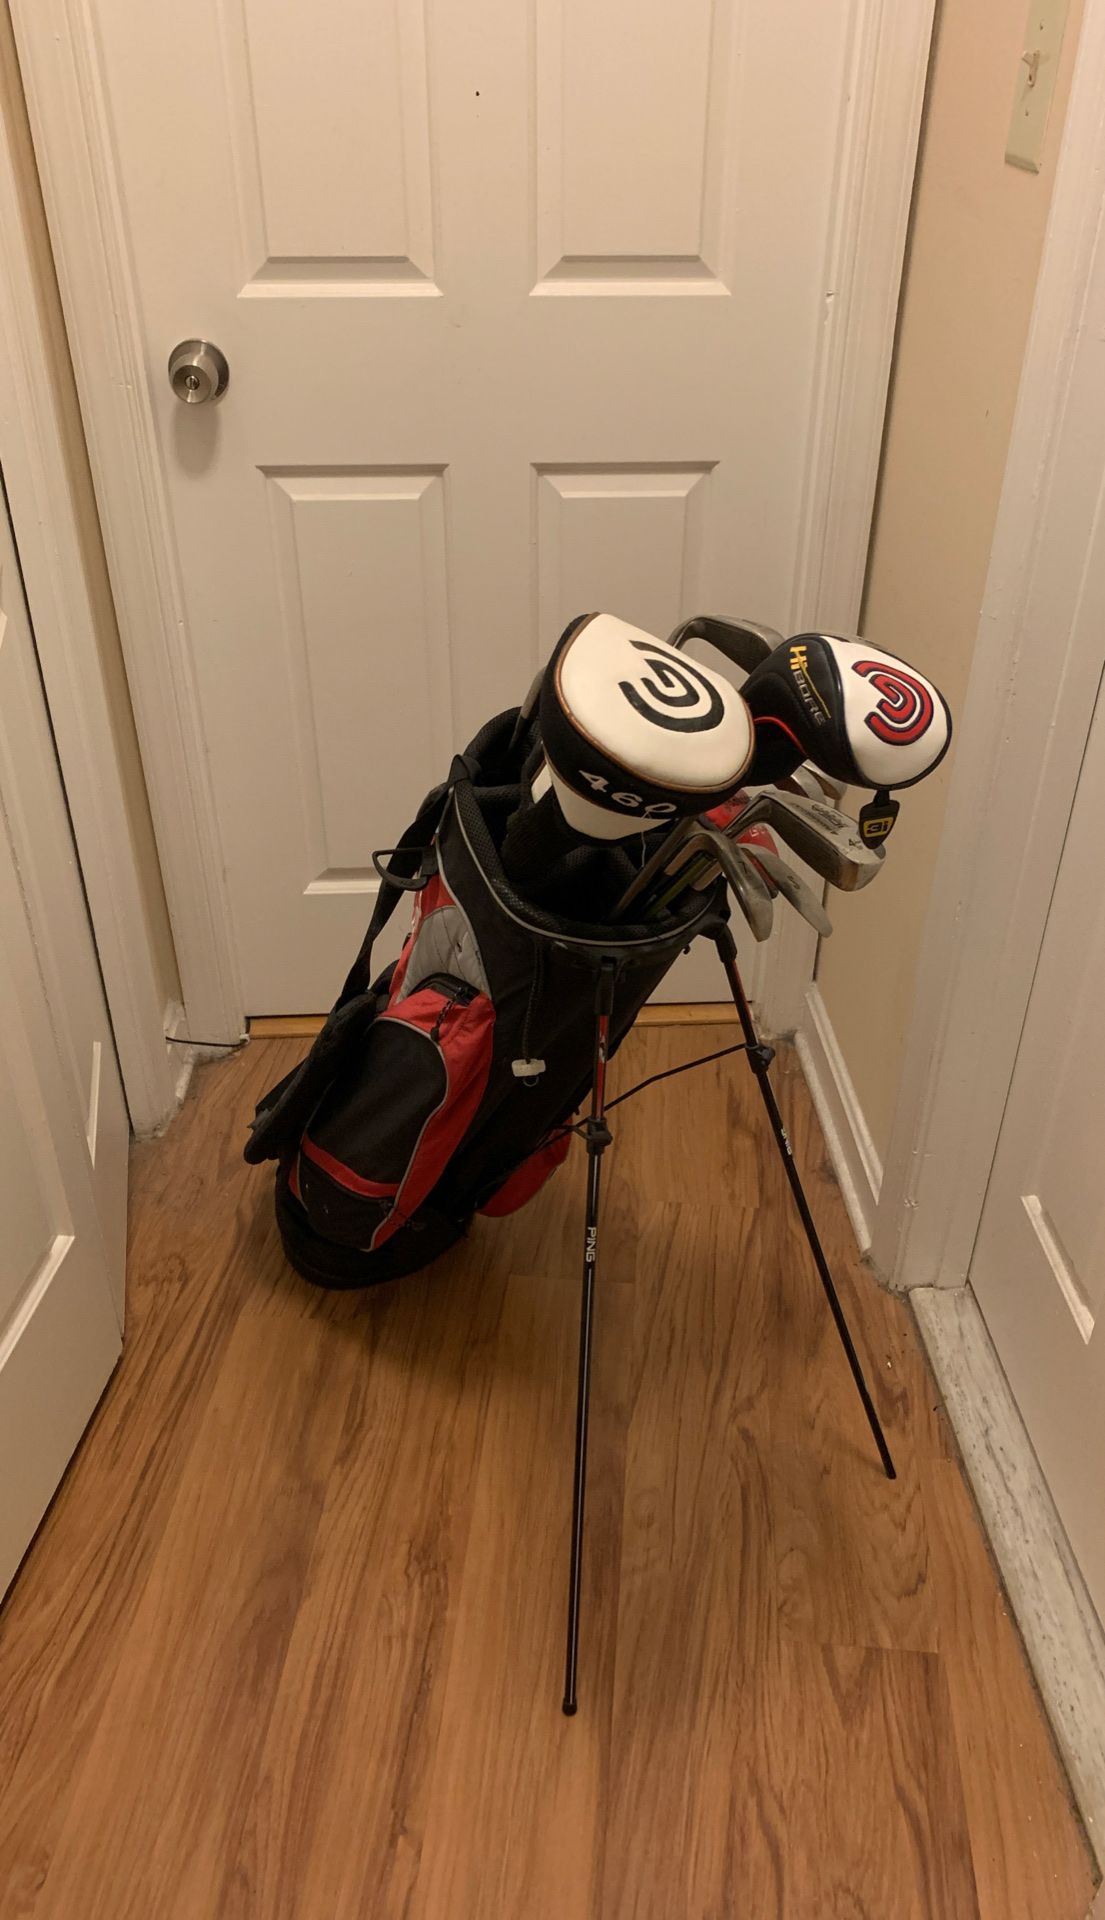 Full Golf Set with Golf Bag and balls